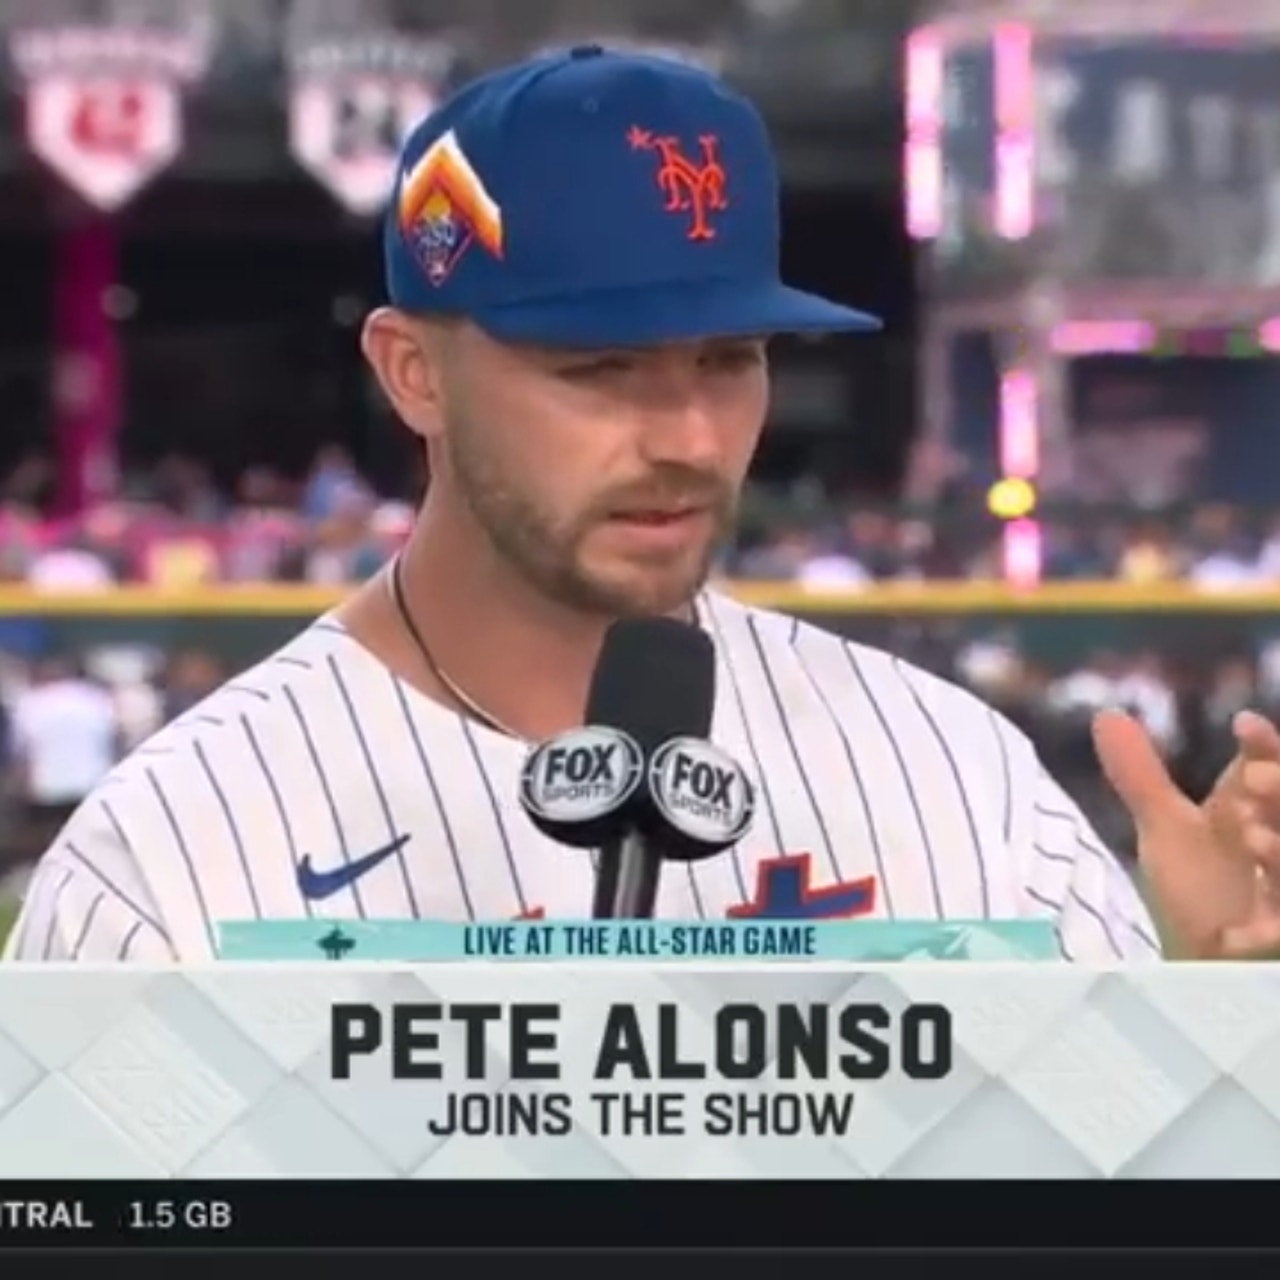 Nothing's better than being a champion' - Mets' Pete Alonso speaks on  getting ready for the 2023 Home Run Derby